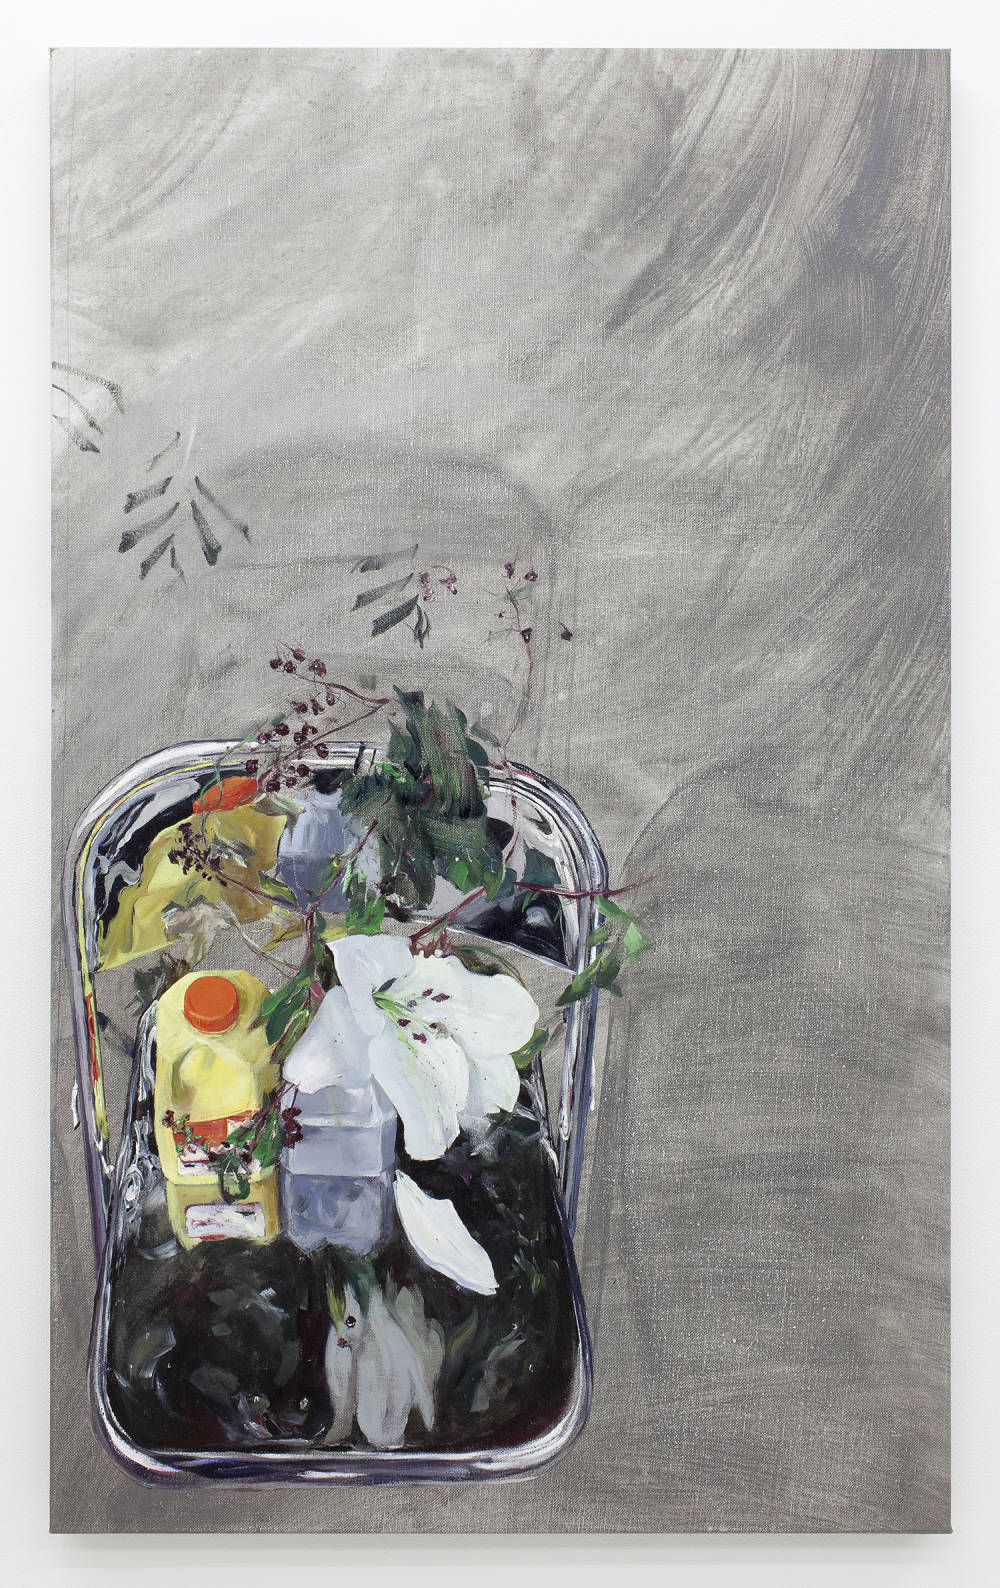 A thin, vertical painting depicting a bird's-eye view of a chrome, reflective chair in the bottom left corner. Sitting on the chair is a jug of orange juice and a bouquet of flowers. The background of the painting is brushy mixture of gray paint.